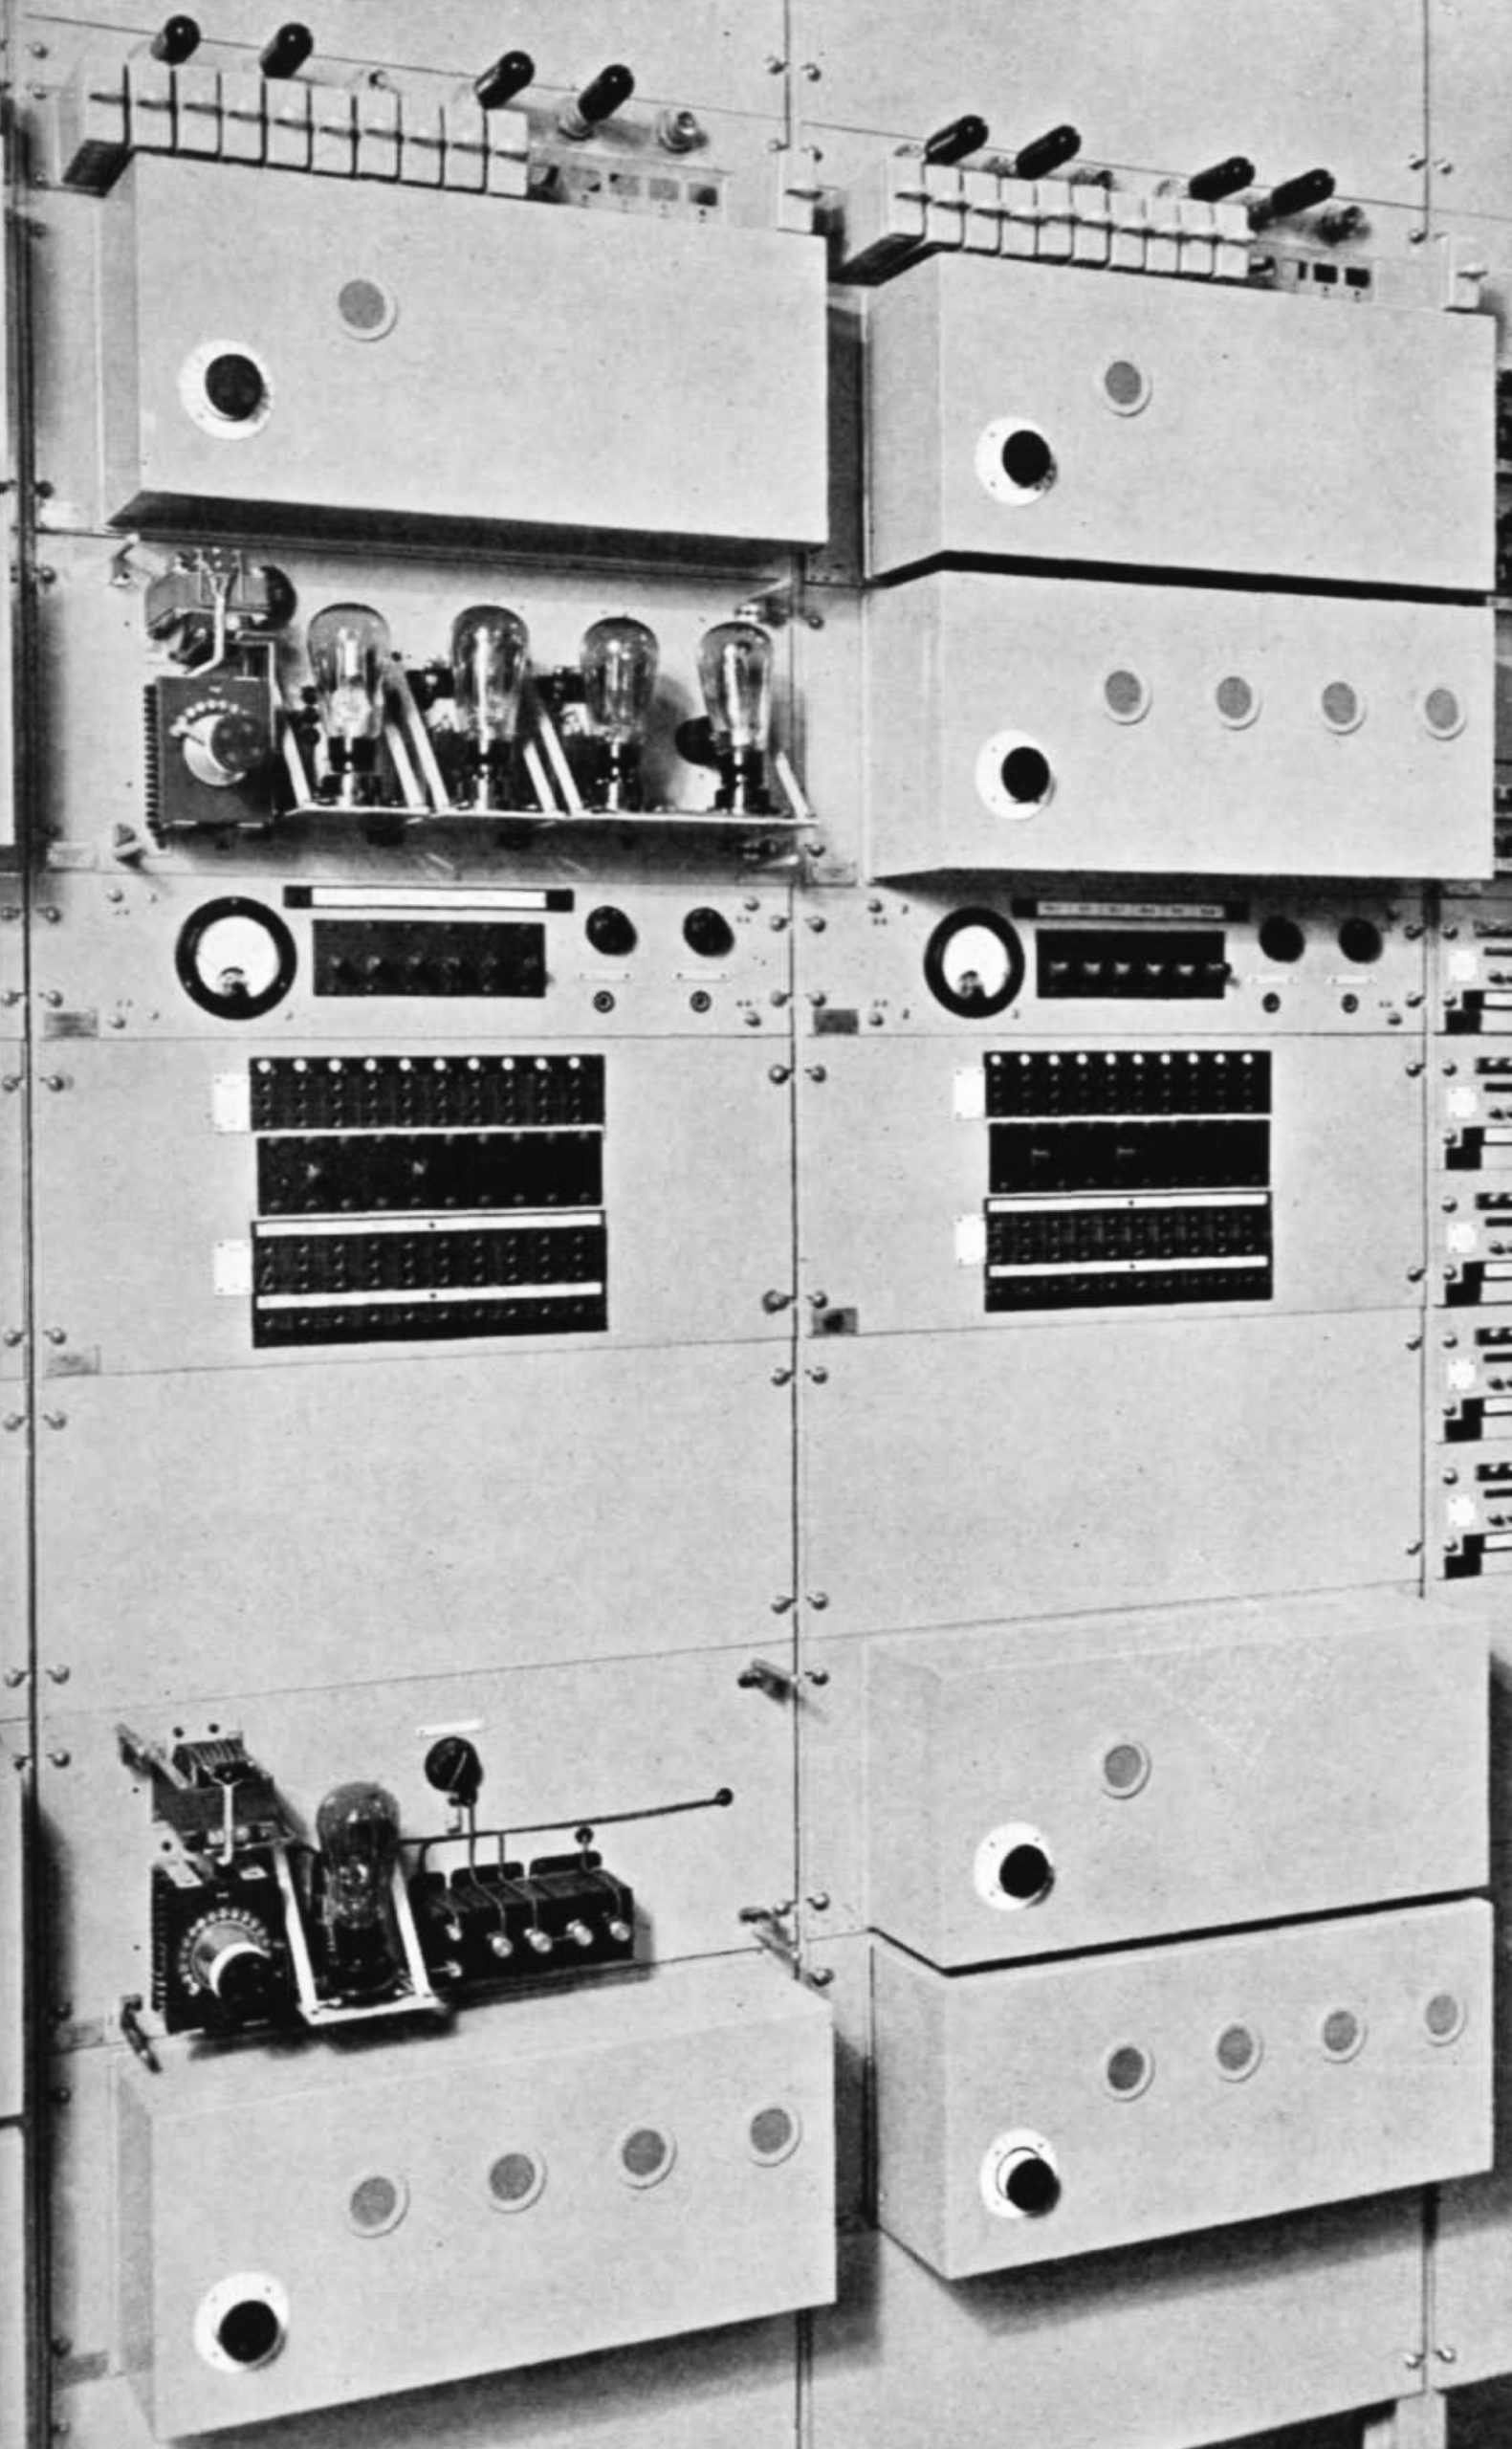 Valves, dials and control knobs on a vertical bank of equipment